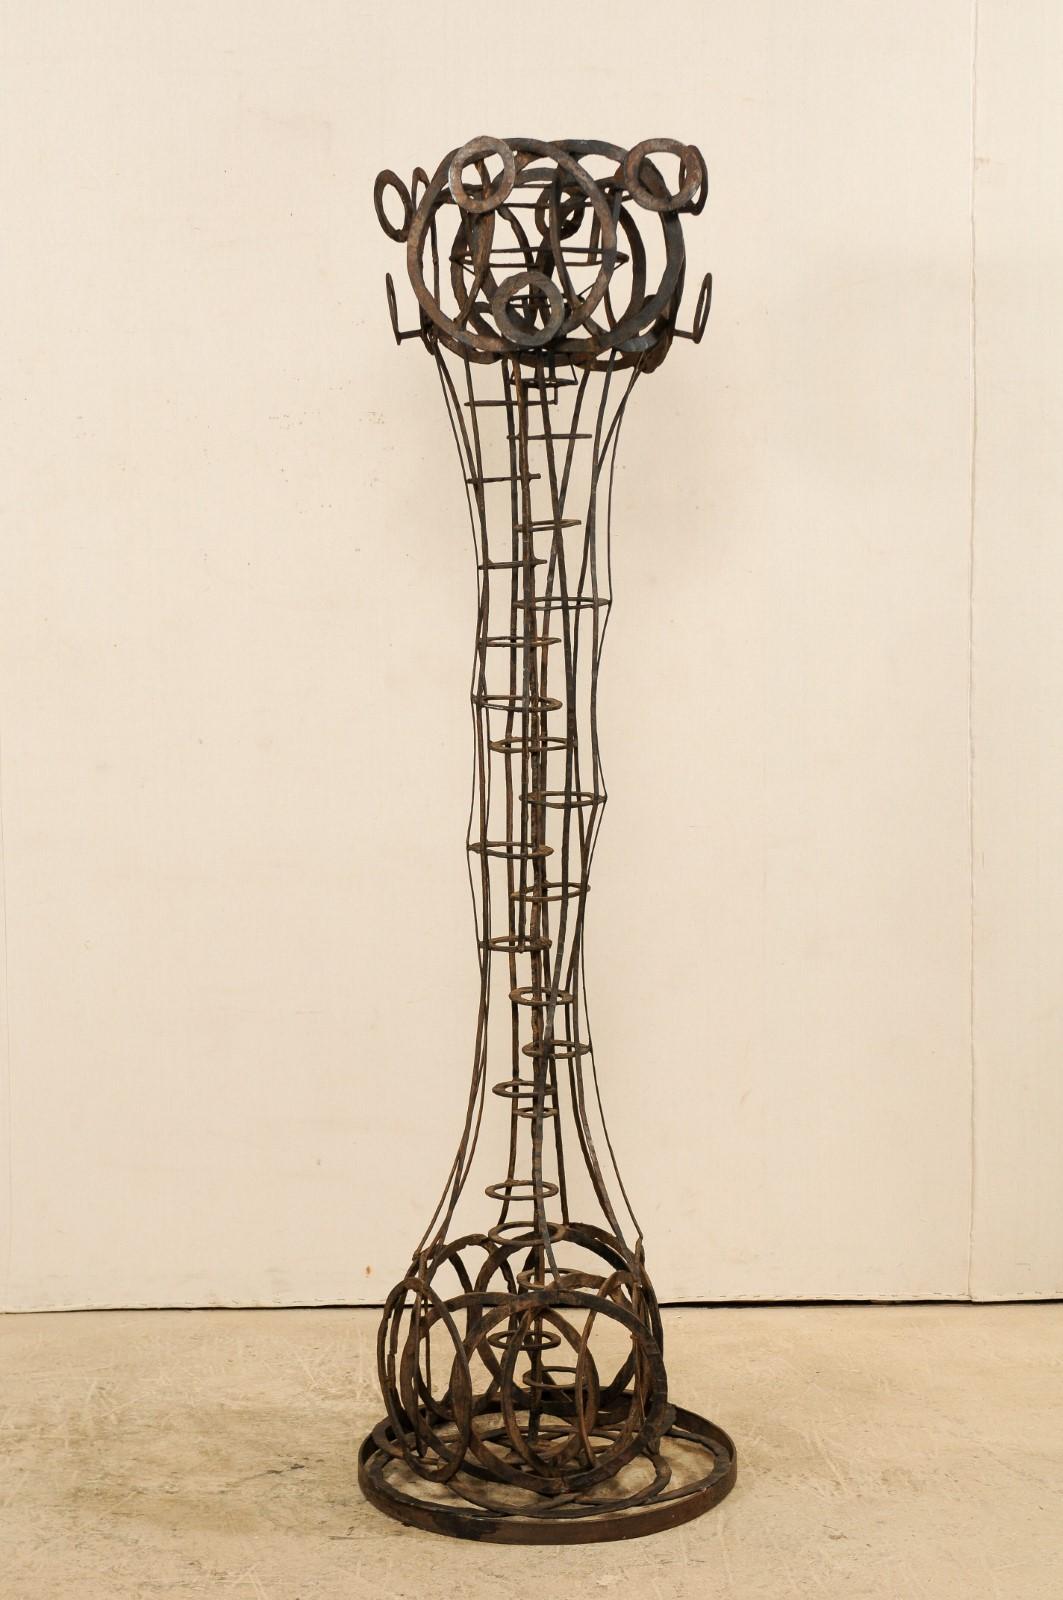 A tall French sculptural iron art piece in a motif of rings from the 1930s-1940s. This unique sculpture from France, standing at approximately 6.6 feet in height, has a playful abstract vertical form made up of a series of rings, with circles